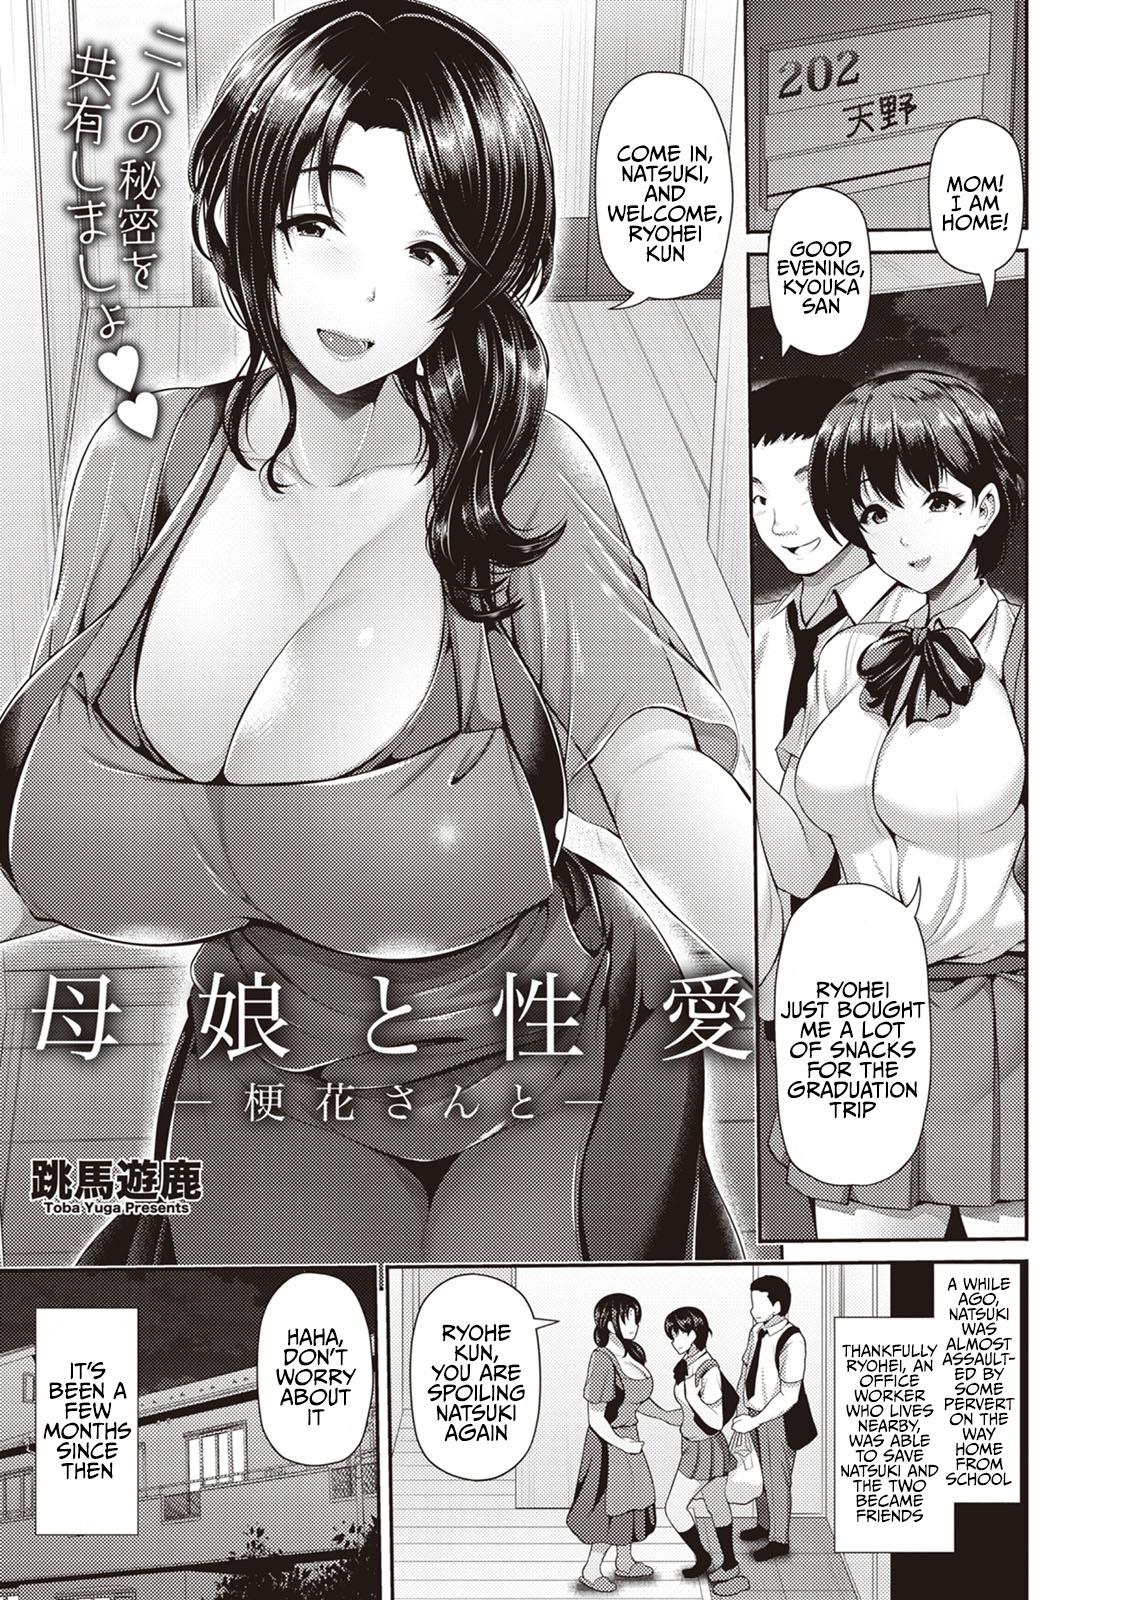 Leather Oyako to Seiai | Sexual Relations with Mother and Daughter ~ Kyouka San Pau Grande - Page 2